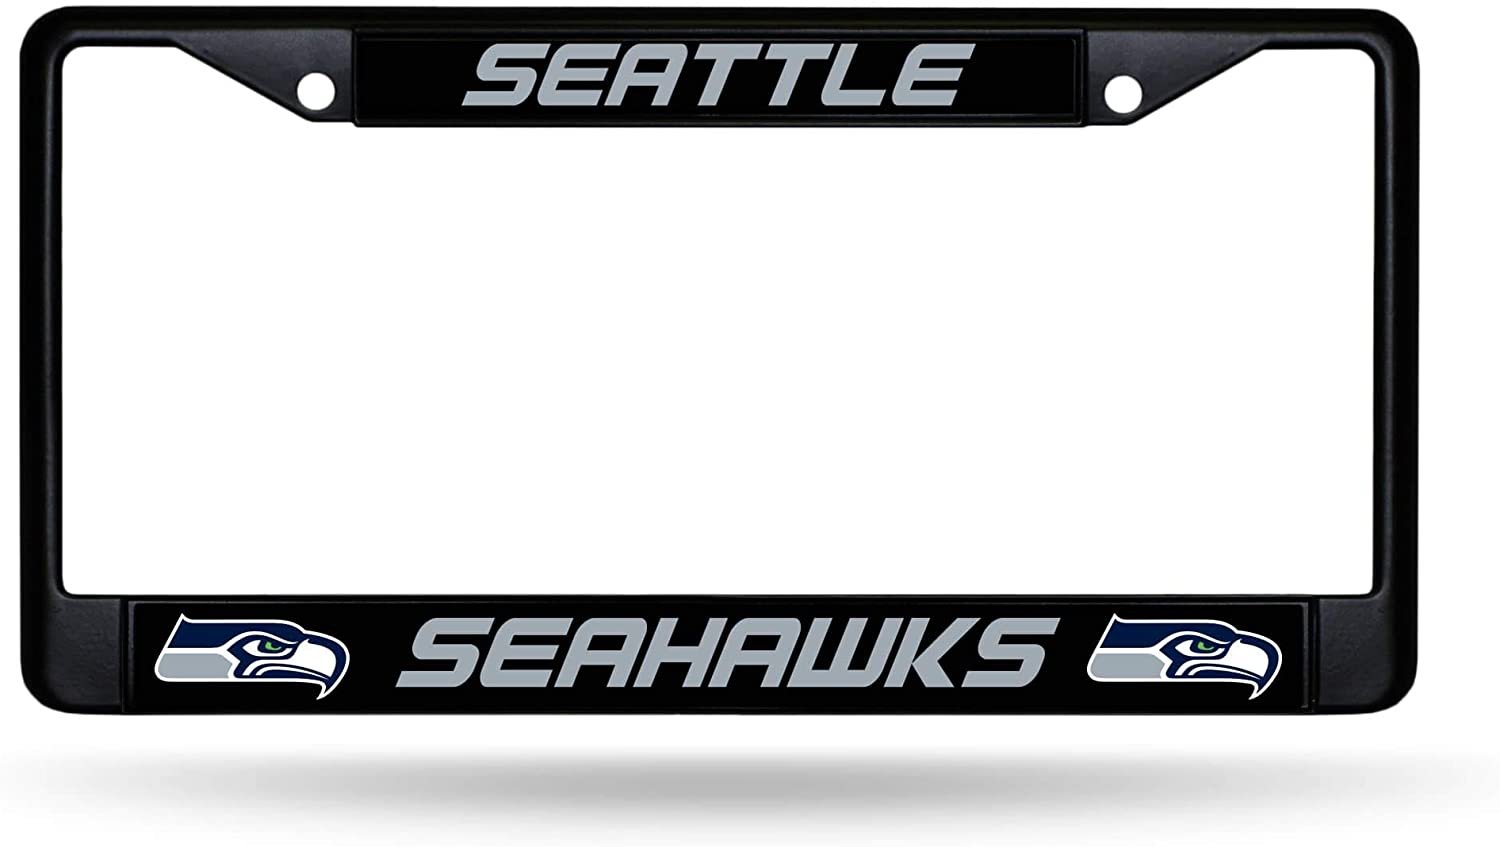 Seattle Seahawks Metal License Plate Frame Black Tag Cover 12x6 Inch